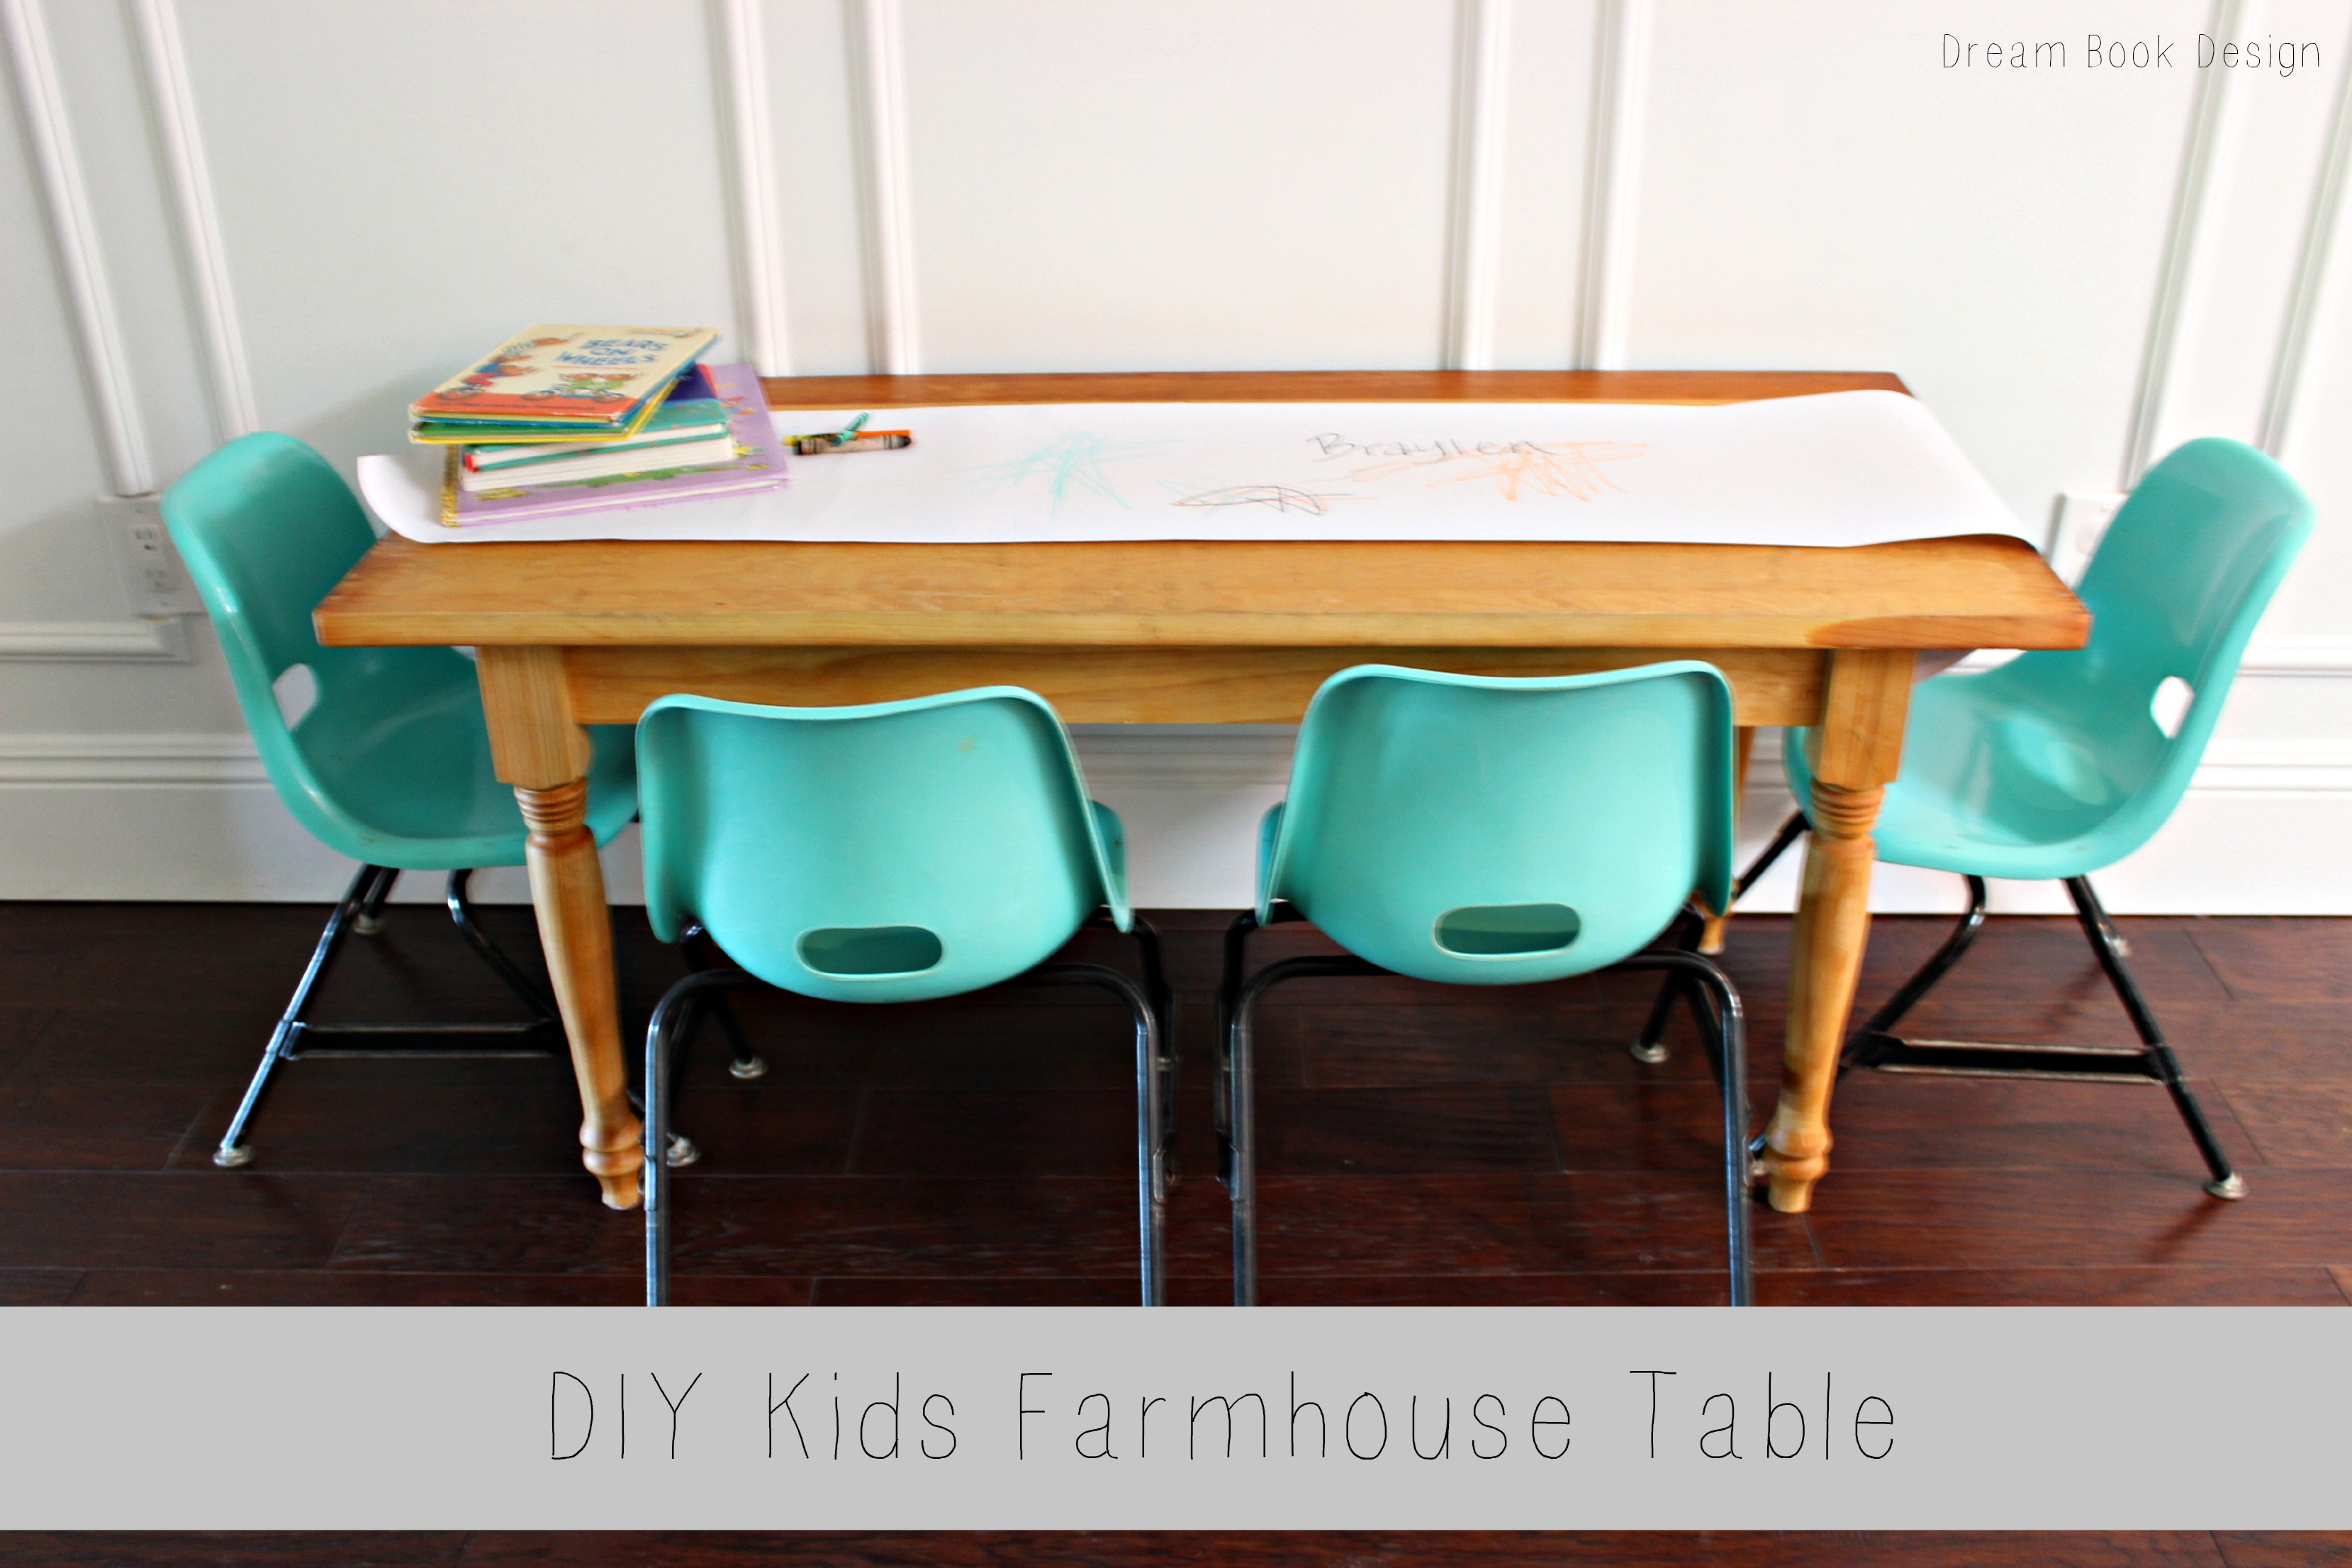 Best ideas about DIY Kids Tables
. Save or Pin DIY Kids Farmhouse Table Dream Book Design Now.